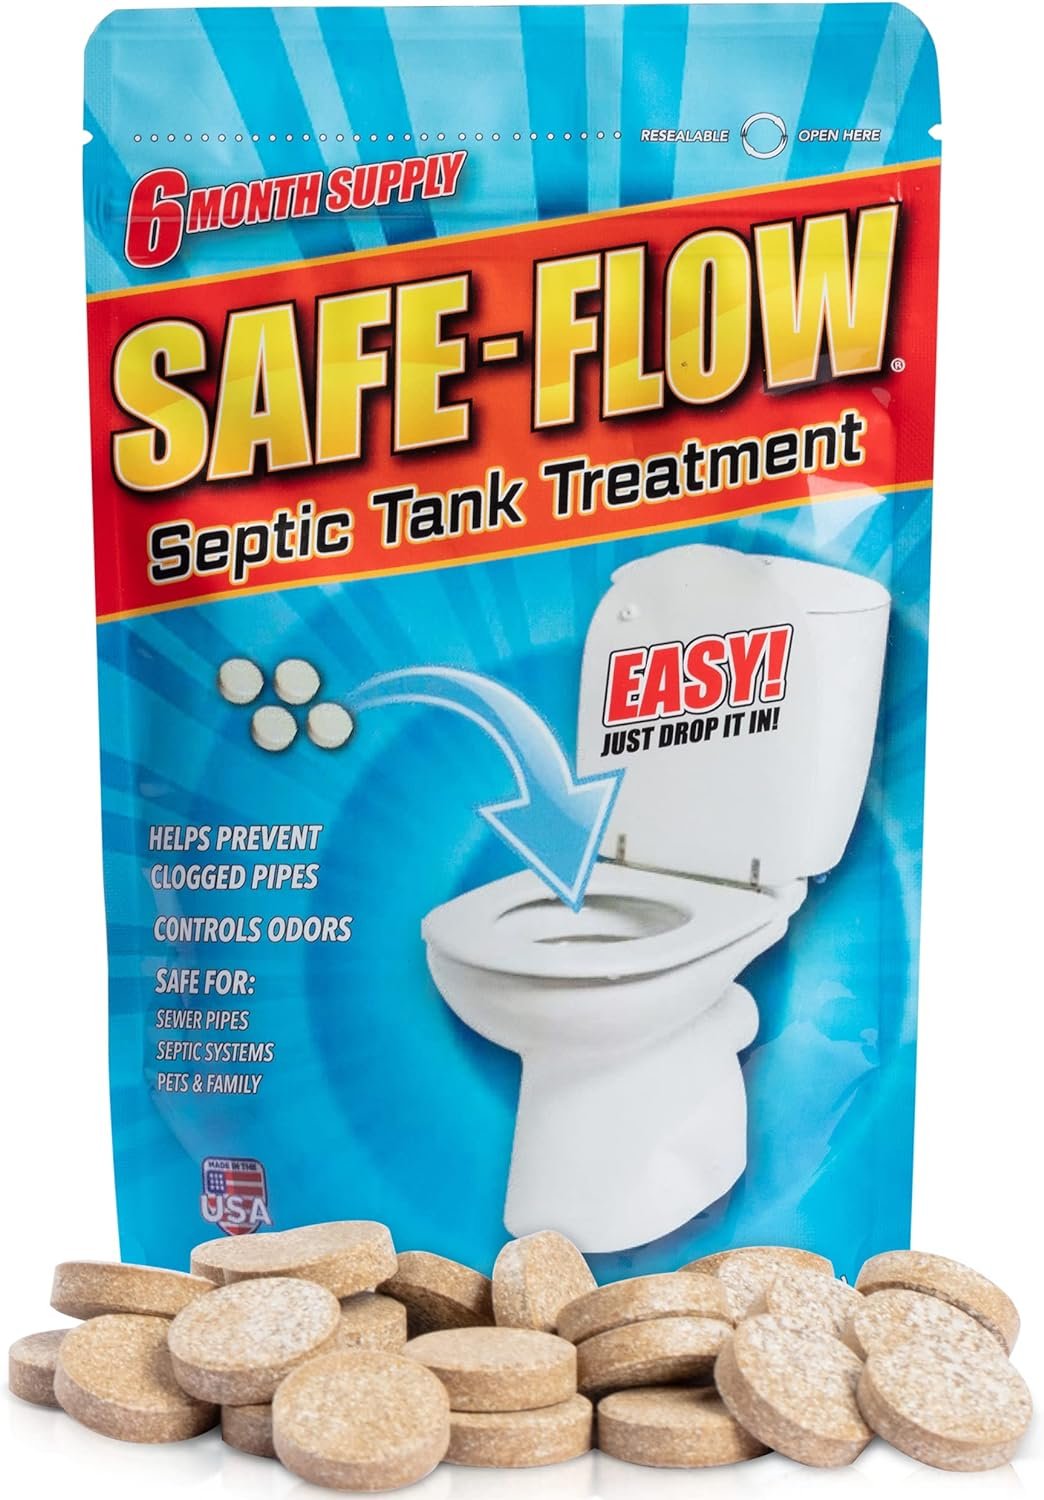 SAFE-FLOW Septic Tank Treatment - 6 Month Supply - 26 Ultra Concentrated Septic Tablets for Mess-Free Treatment - USA-Made Natural Formula for Easy System Maintenance and Smell Control